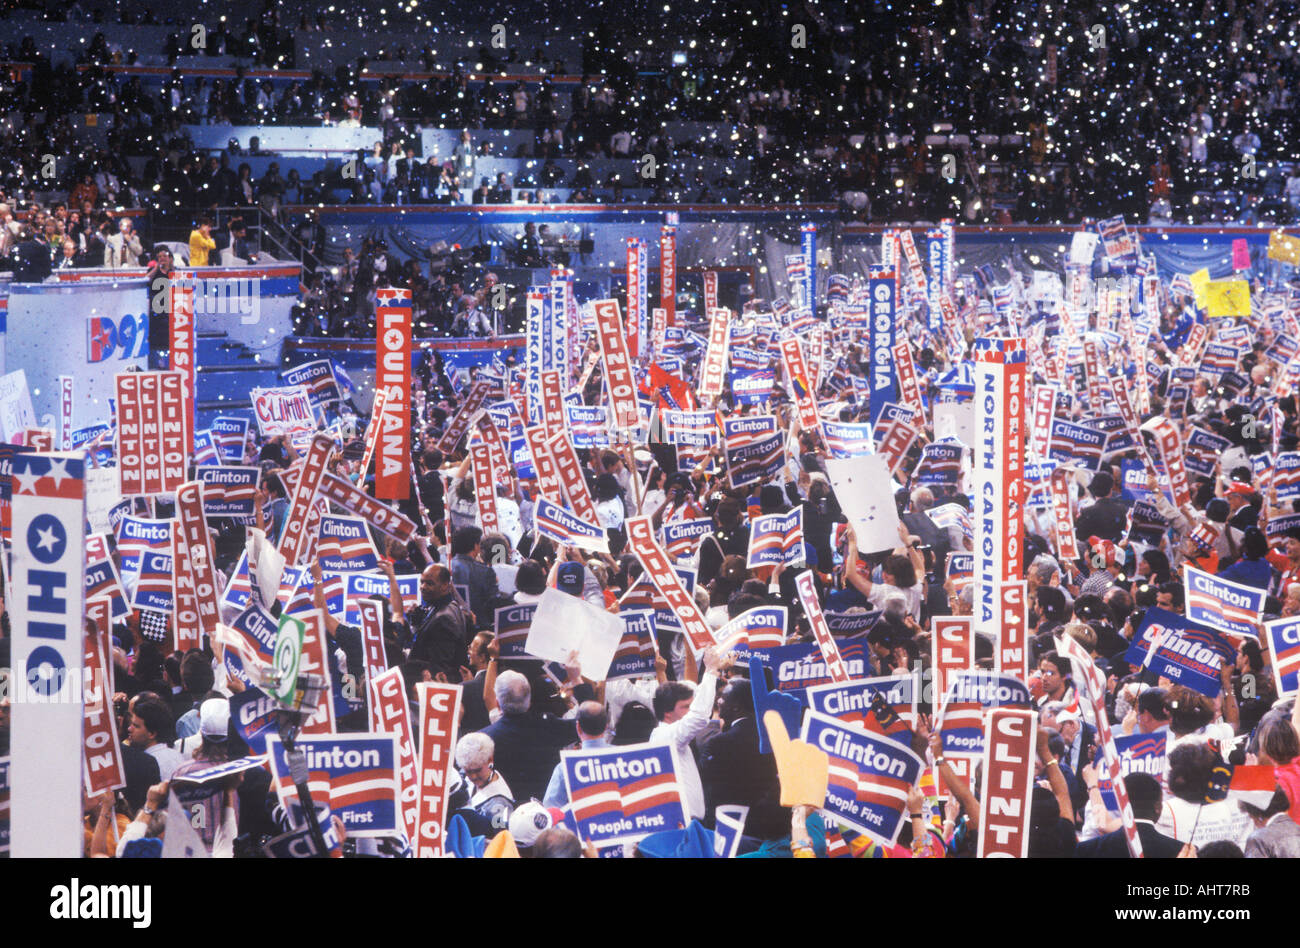 Presidential celebration at the 1992 Democratic National Convention at Madison Square Garden Stock Photo